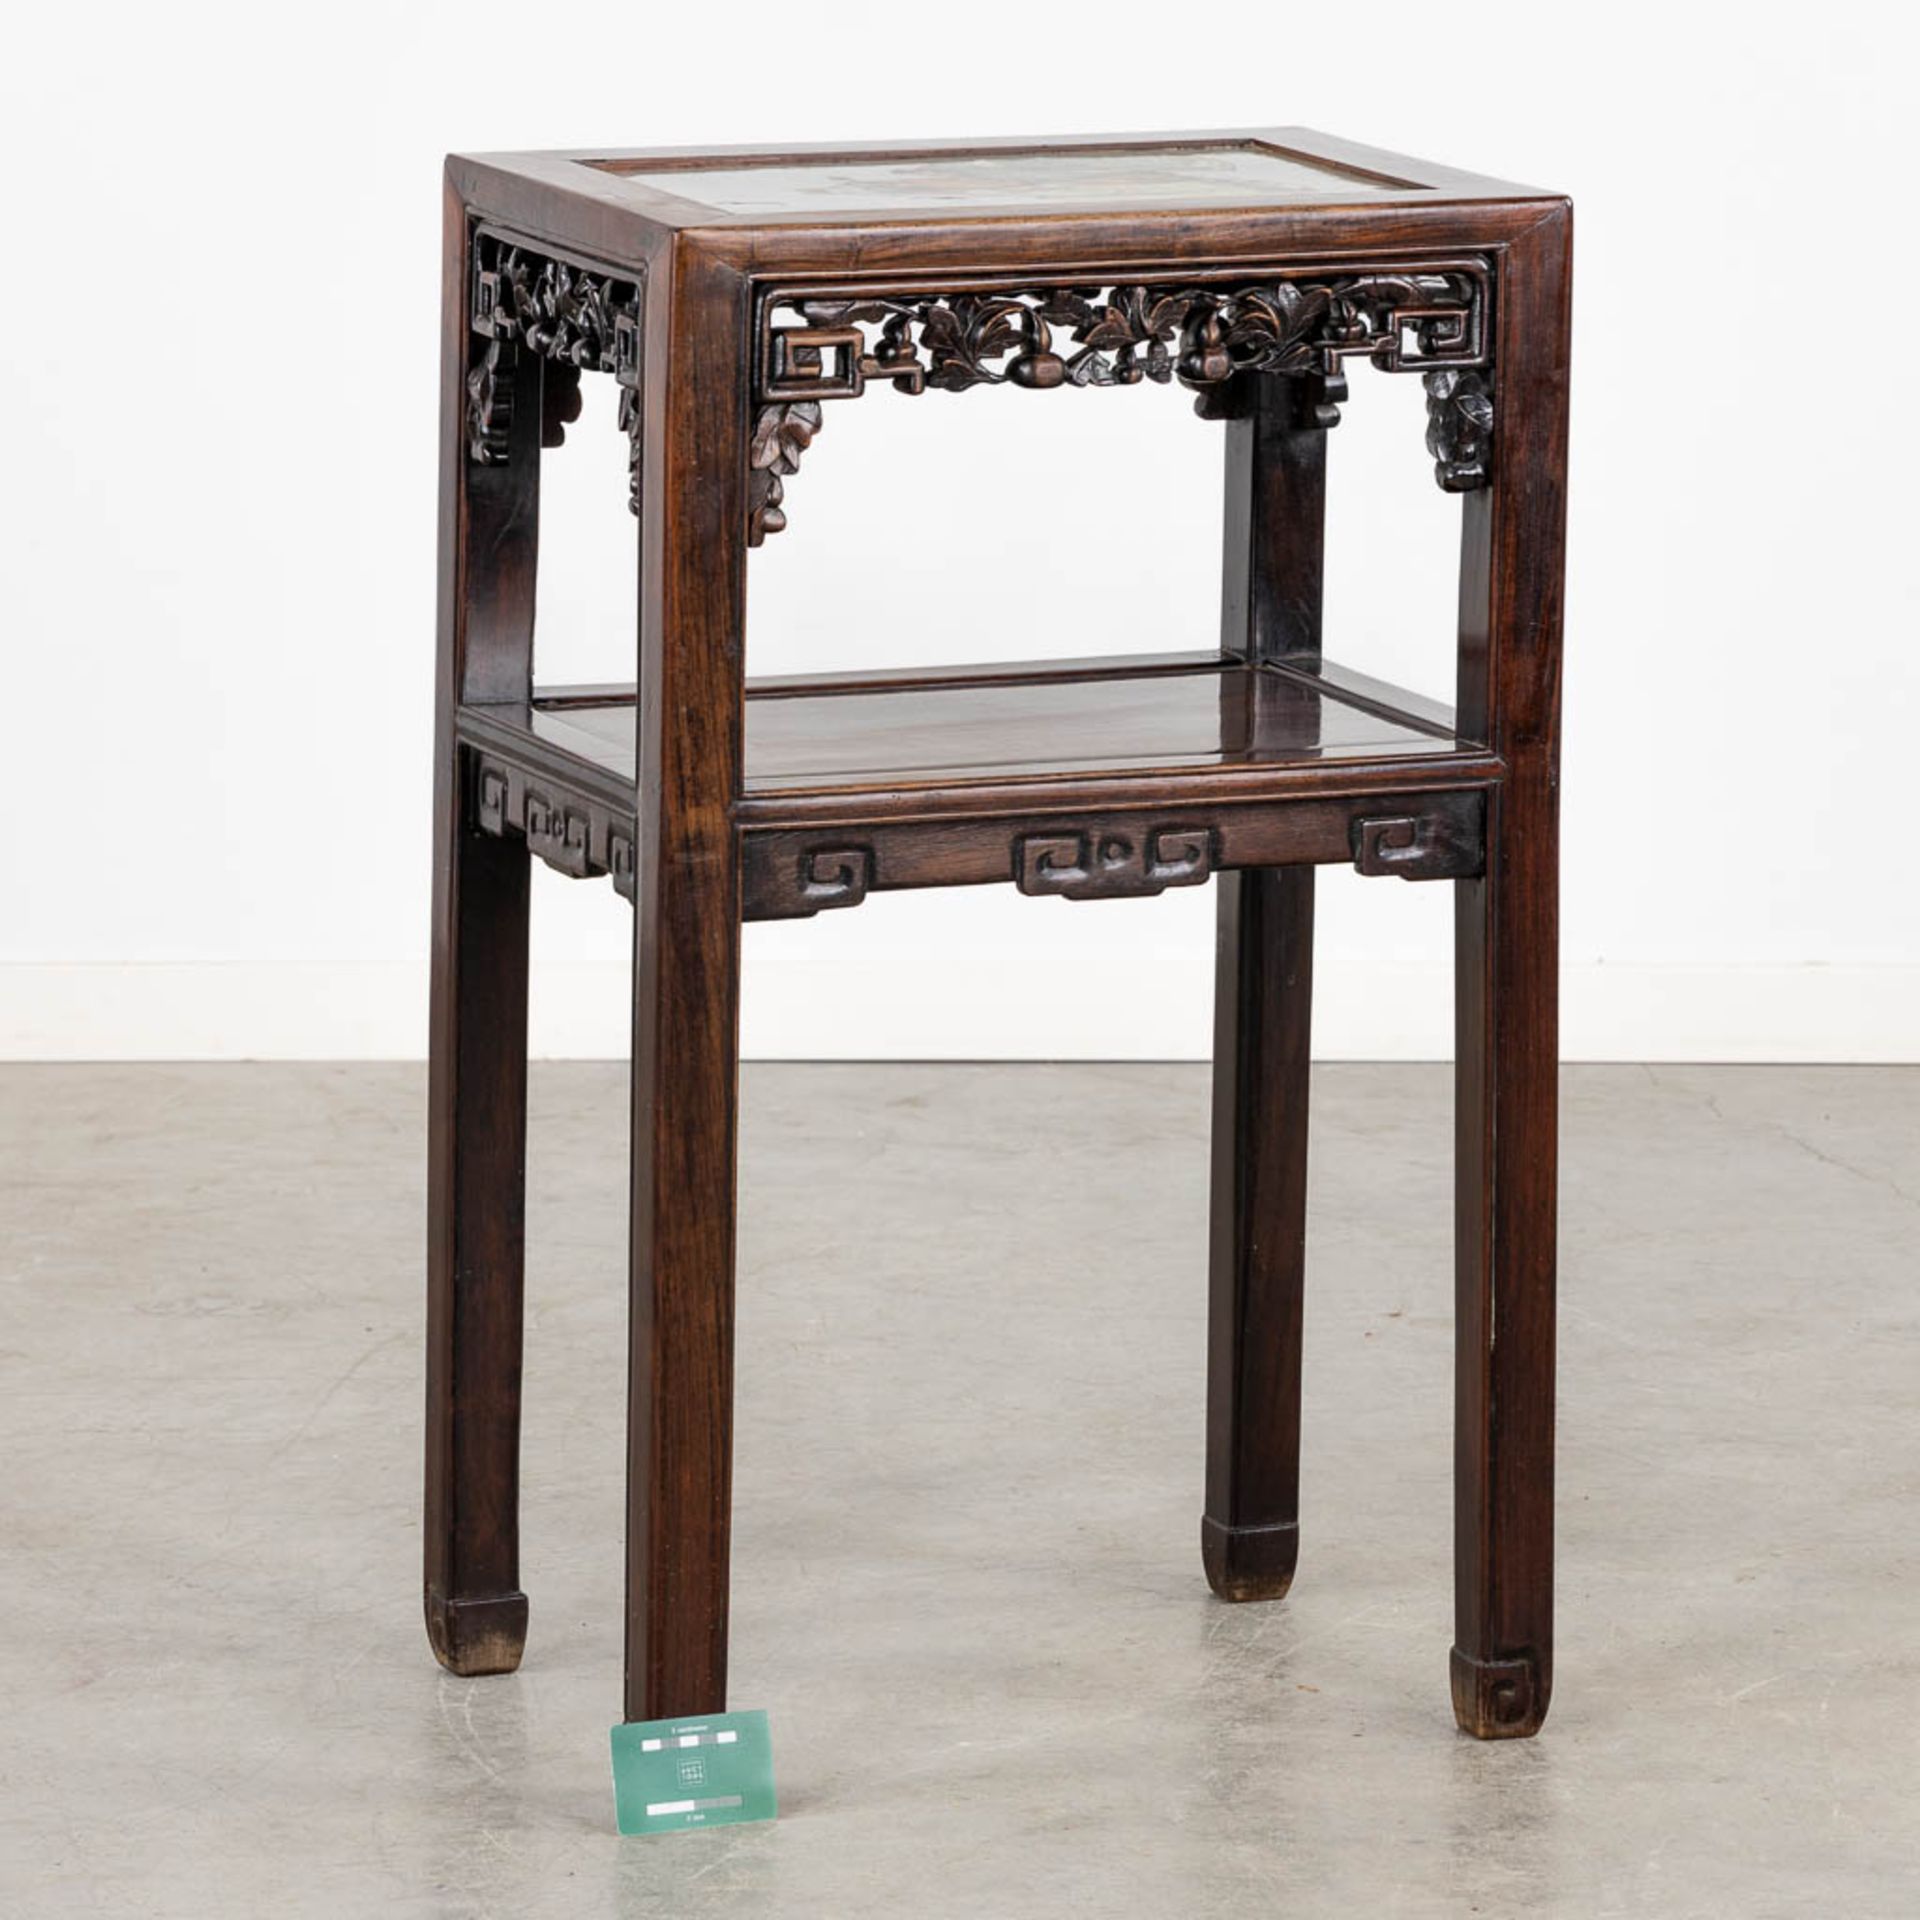 A Chinese side table with a porcelain plaque of Fu Lu and Shou. (L:34 x W:48 x H:80 cm) - Bild 2 aus 10